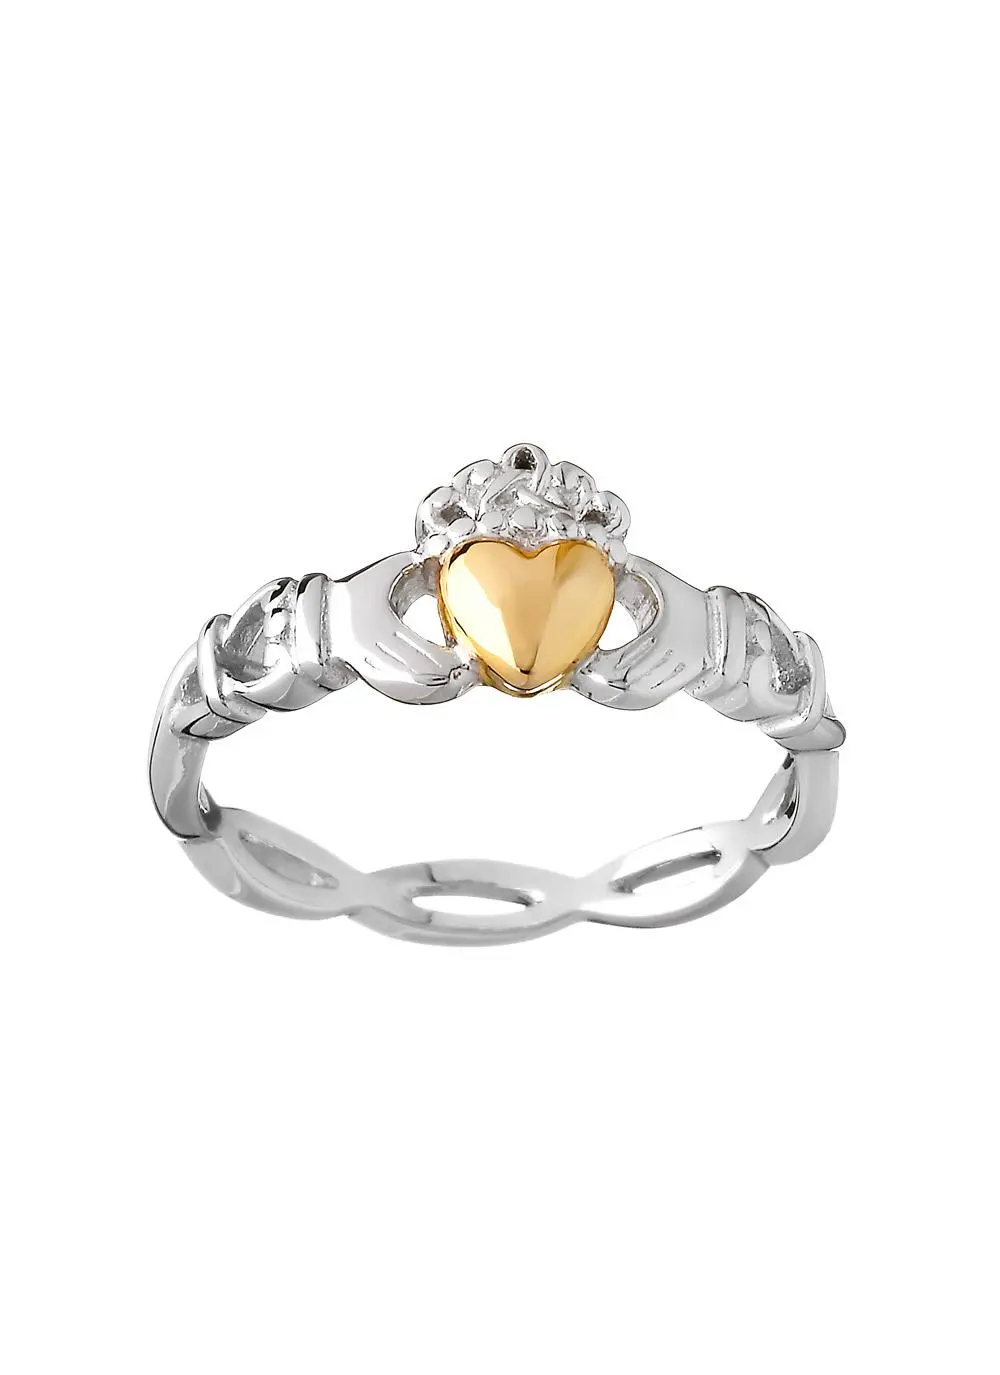 Sterling Silver and Gold Ring | Blarney